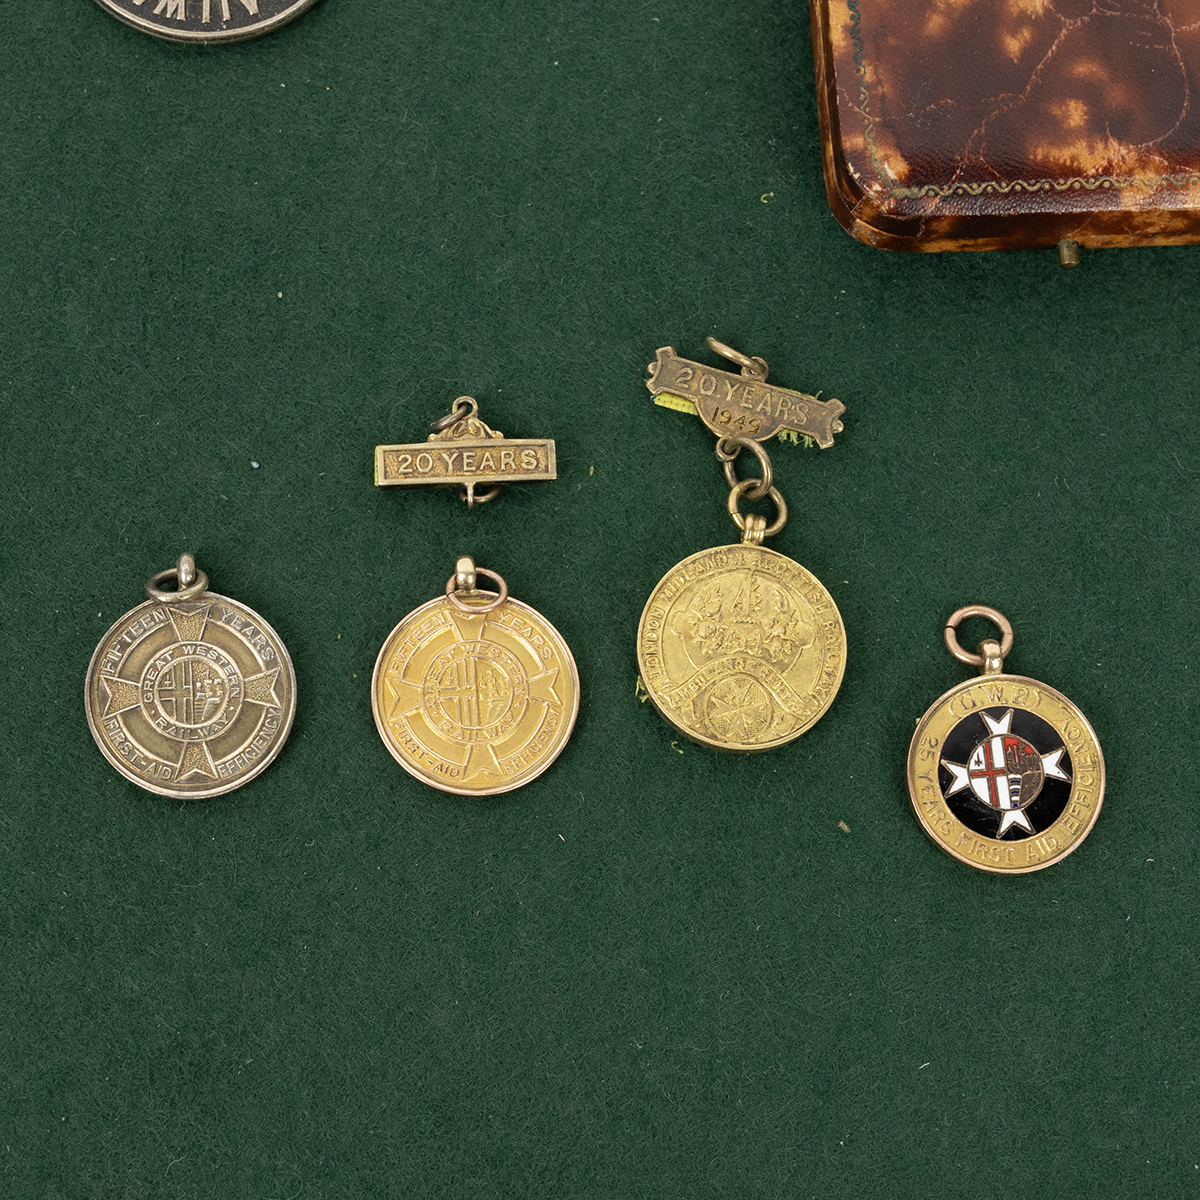 Quantity of railway badges and buttons related to Railway Ambulance services. Includes GWR 15 yea... - Image 3 of 3